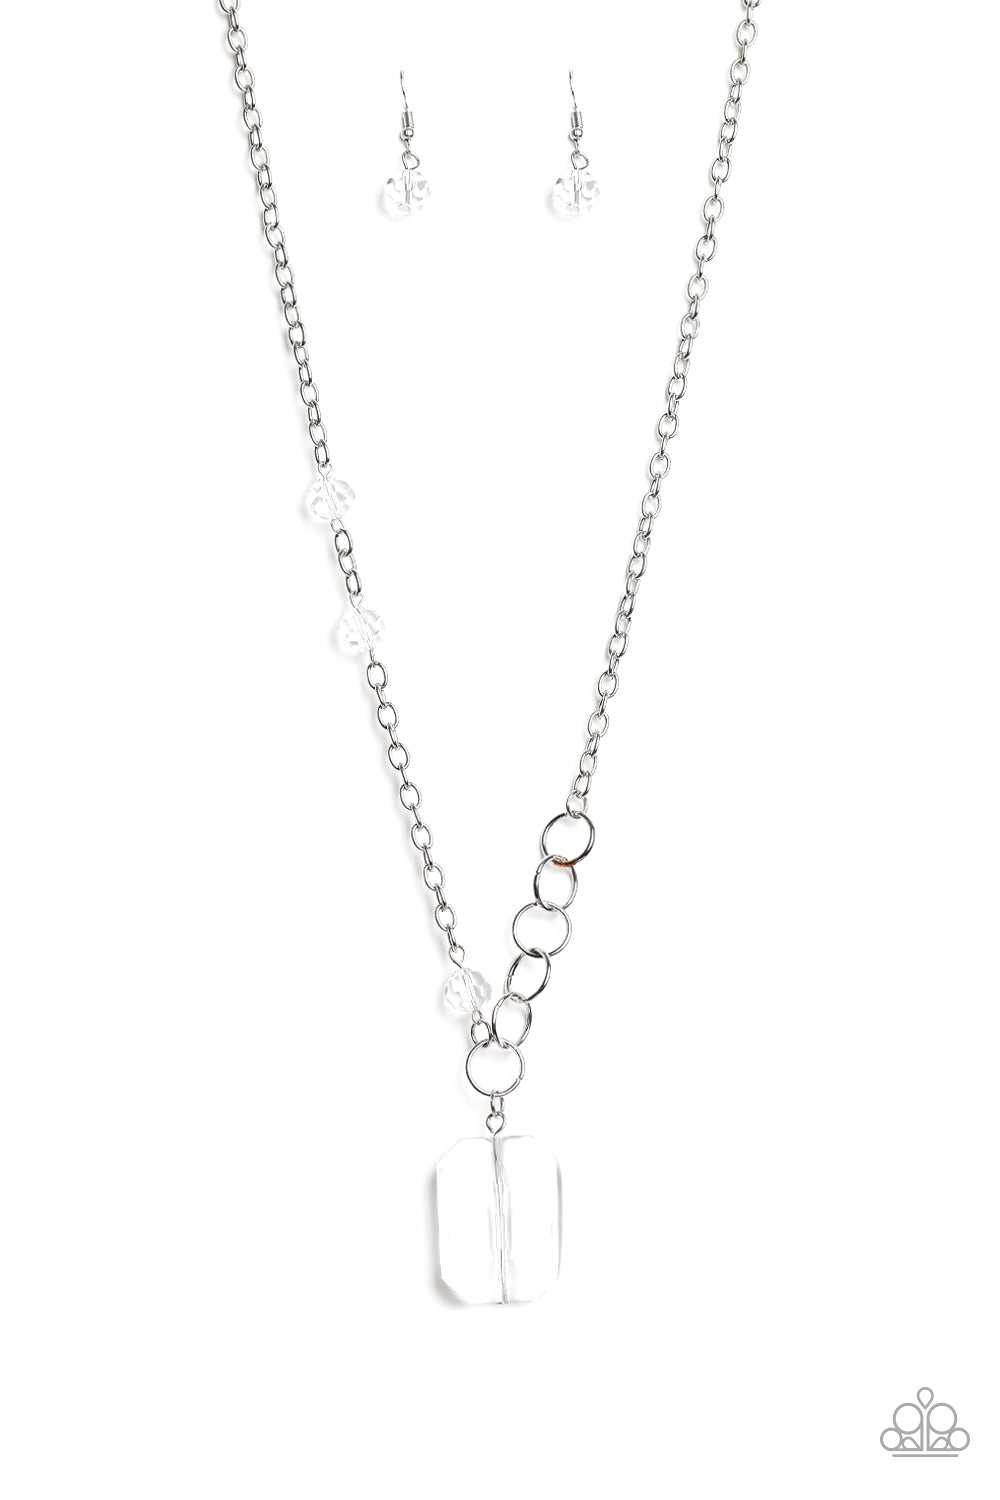 Paparazzi Accessories - brilliant white acrylic center stone, dangling from a dainty silver chain. Classy indeed. 